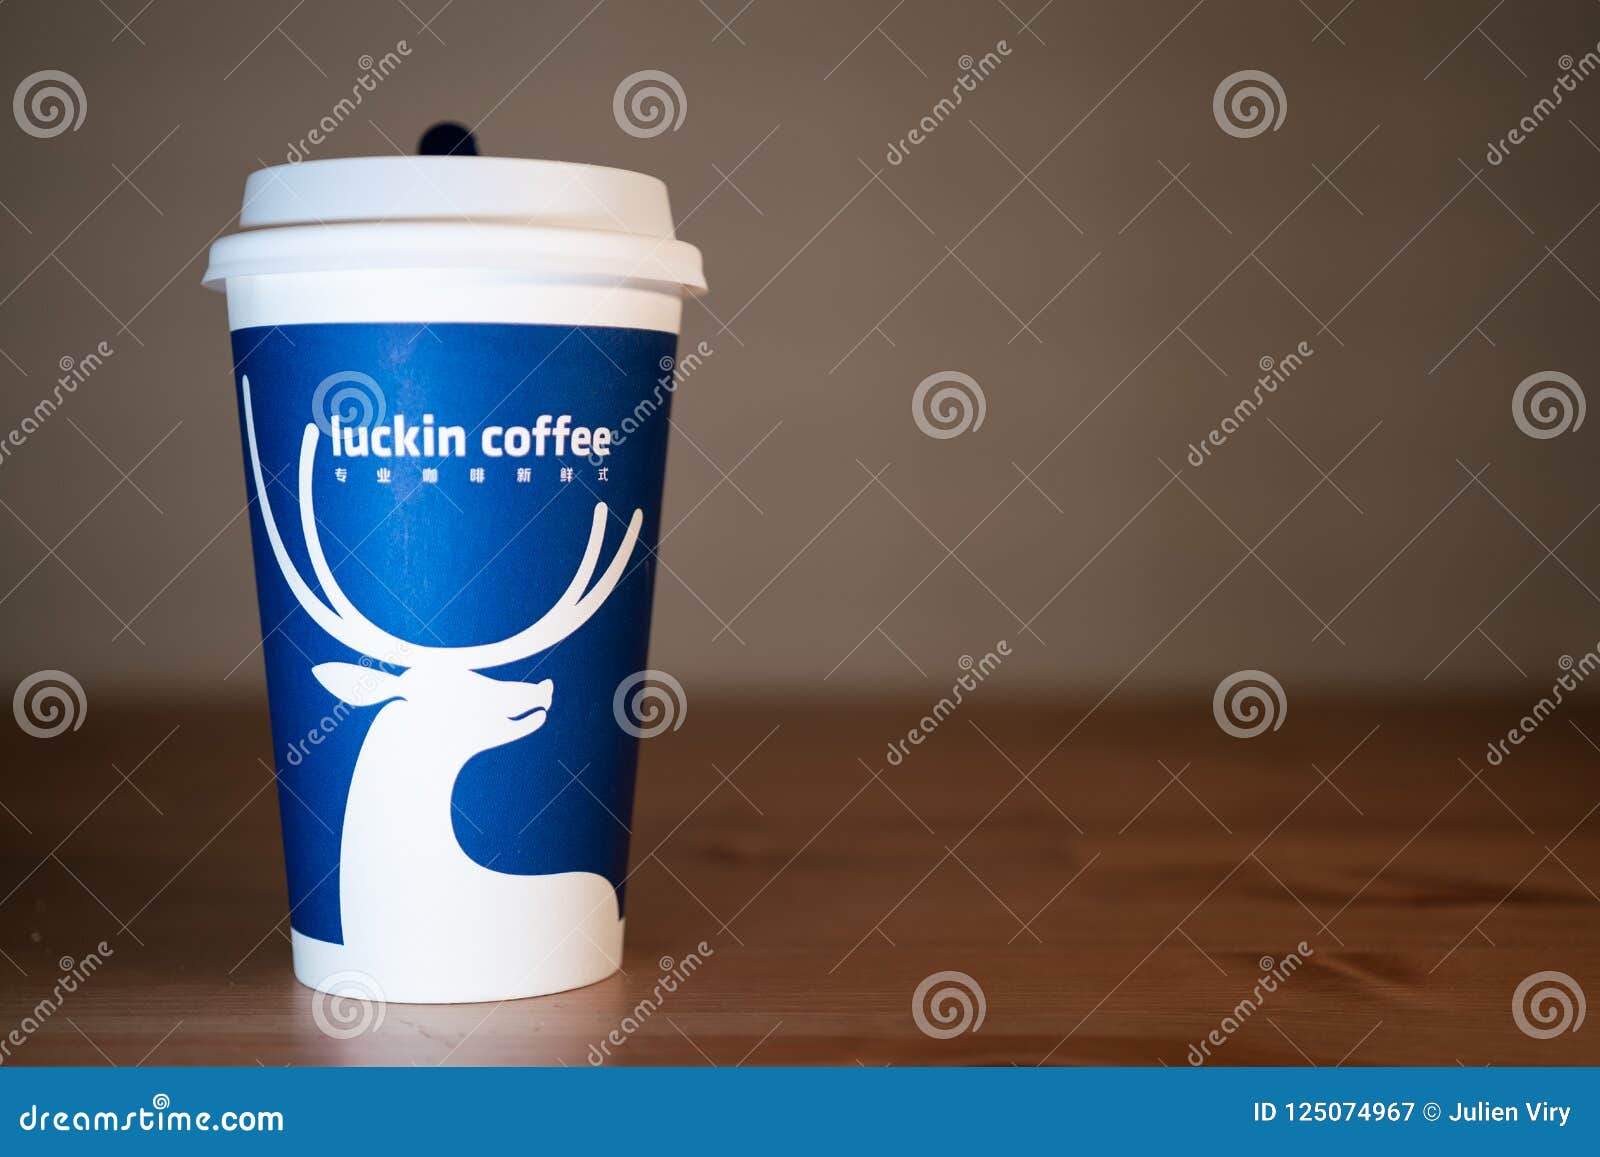 A Coffe Cup Of Luckin Coffee On Wooden Table Background